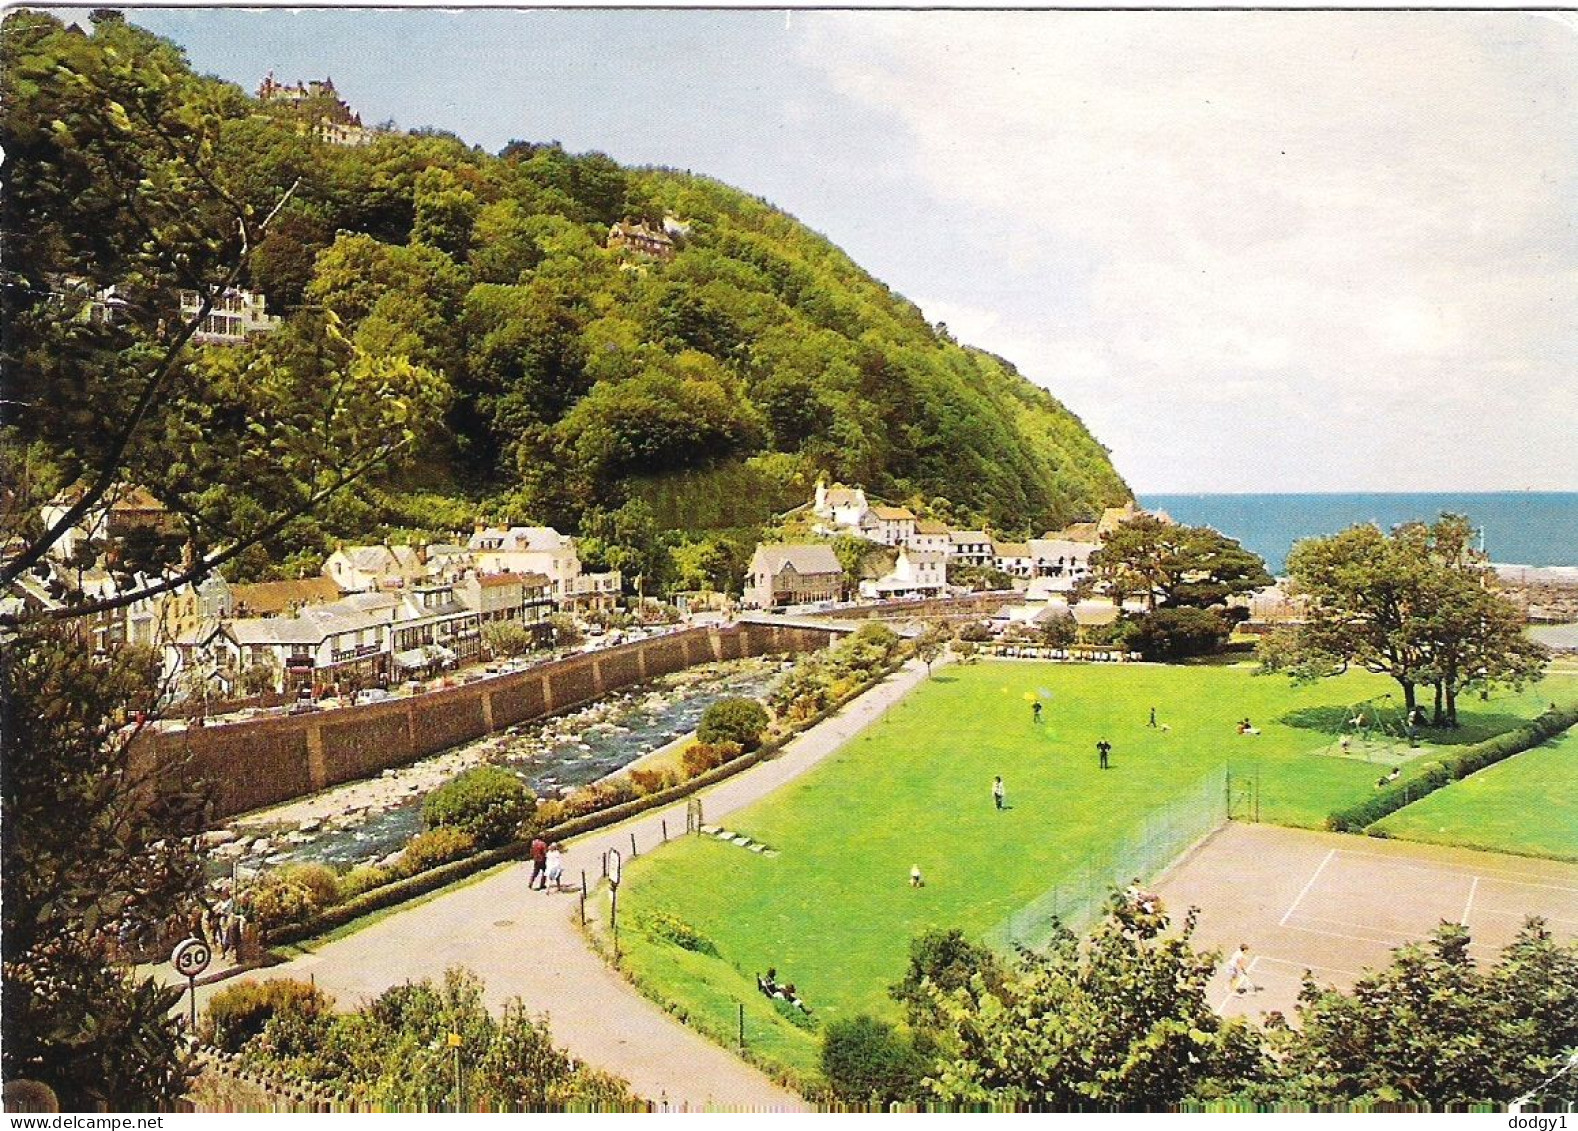 THE TOWN AND HARBOUR, LYNMOUTH, DEVON, ENGLAND. USED POSTCARD Mm9 - Lynmouth & Lynton